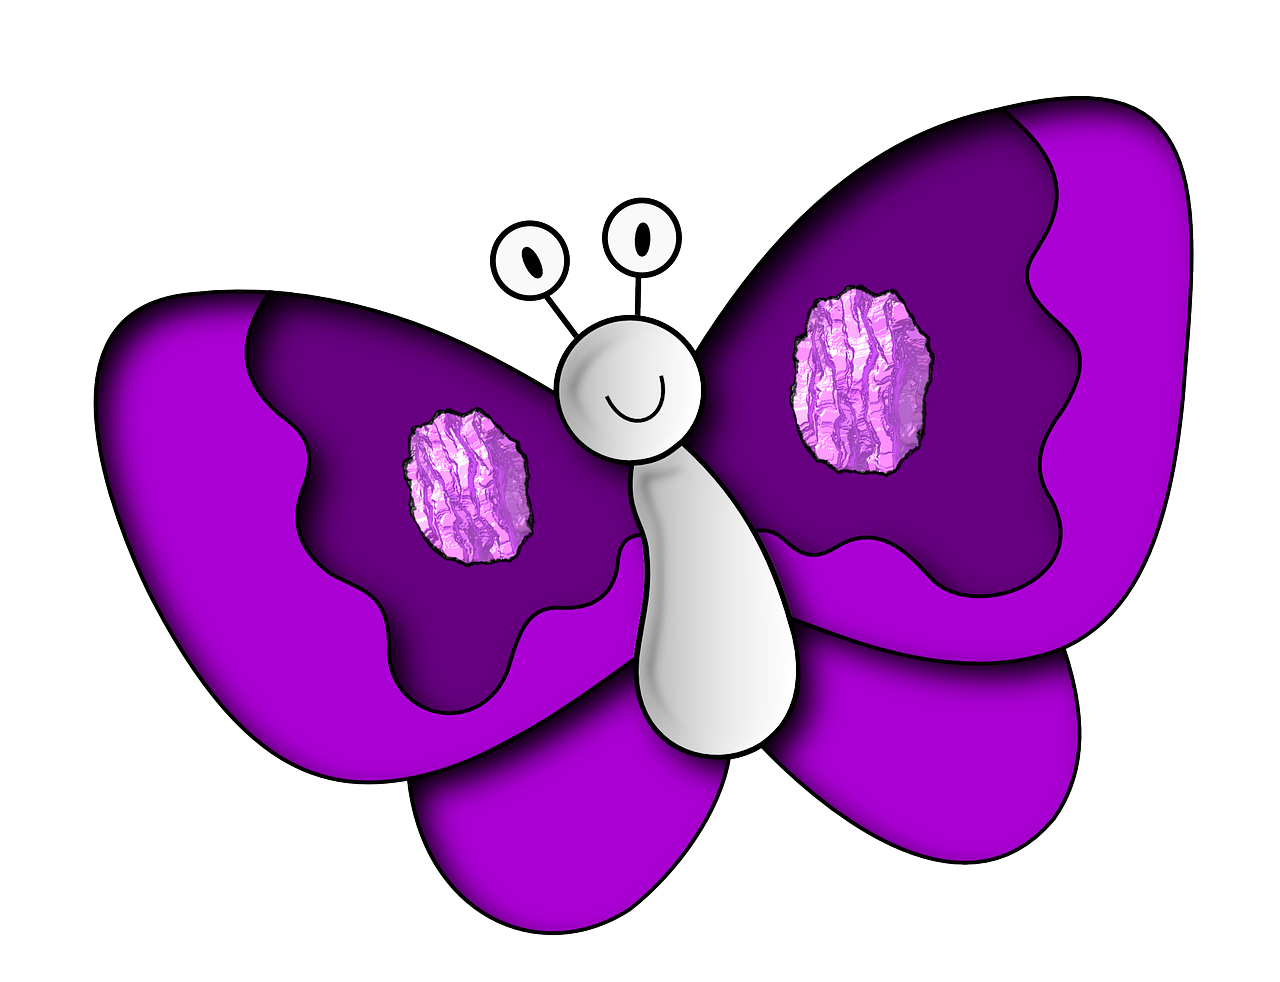 Creative project of the. Preschool clipart butterfly